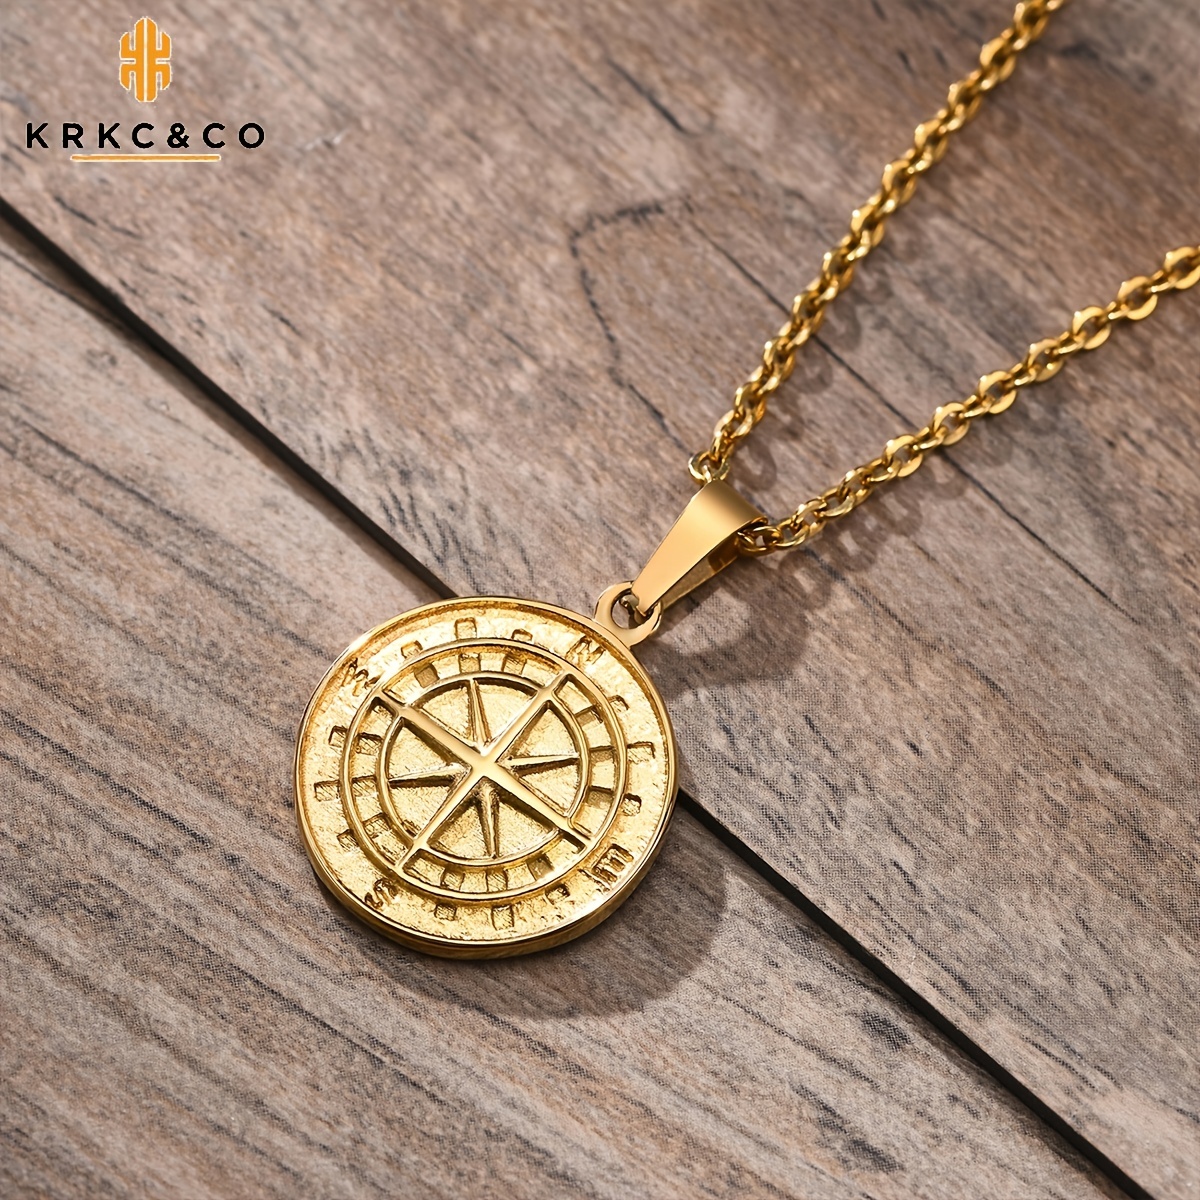 1pc Krkc Co Stainless Steel Compass Coin Pendant Necklace Men's